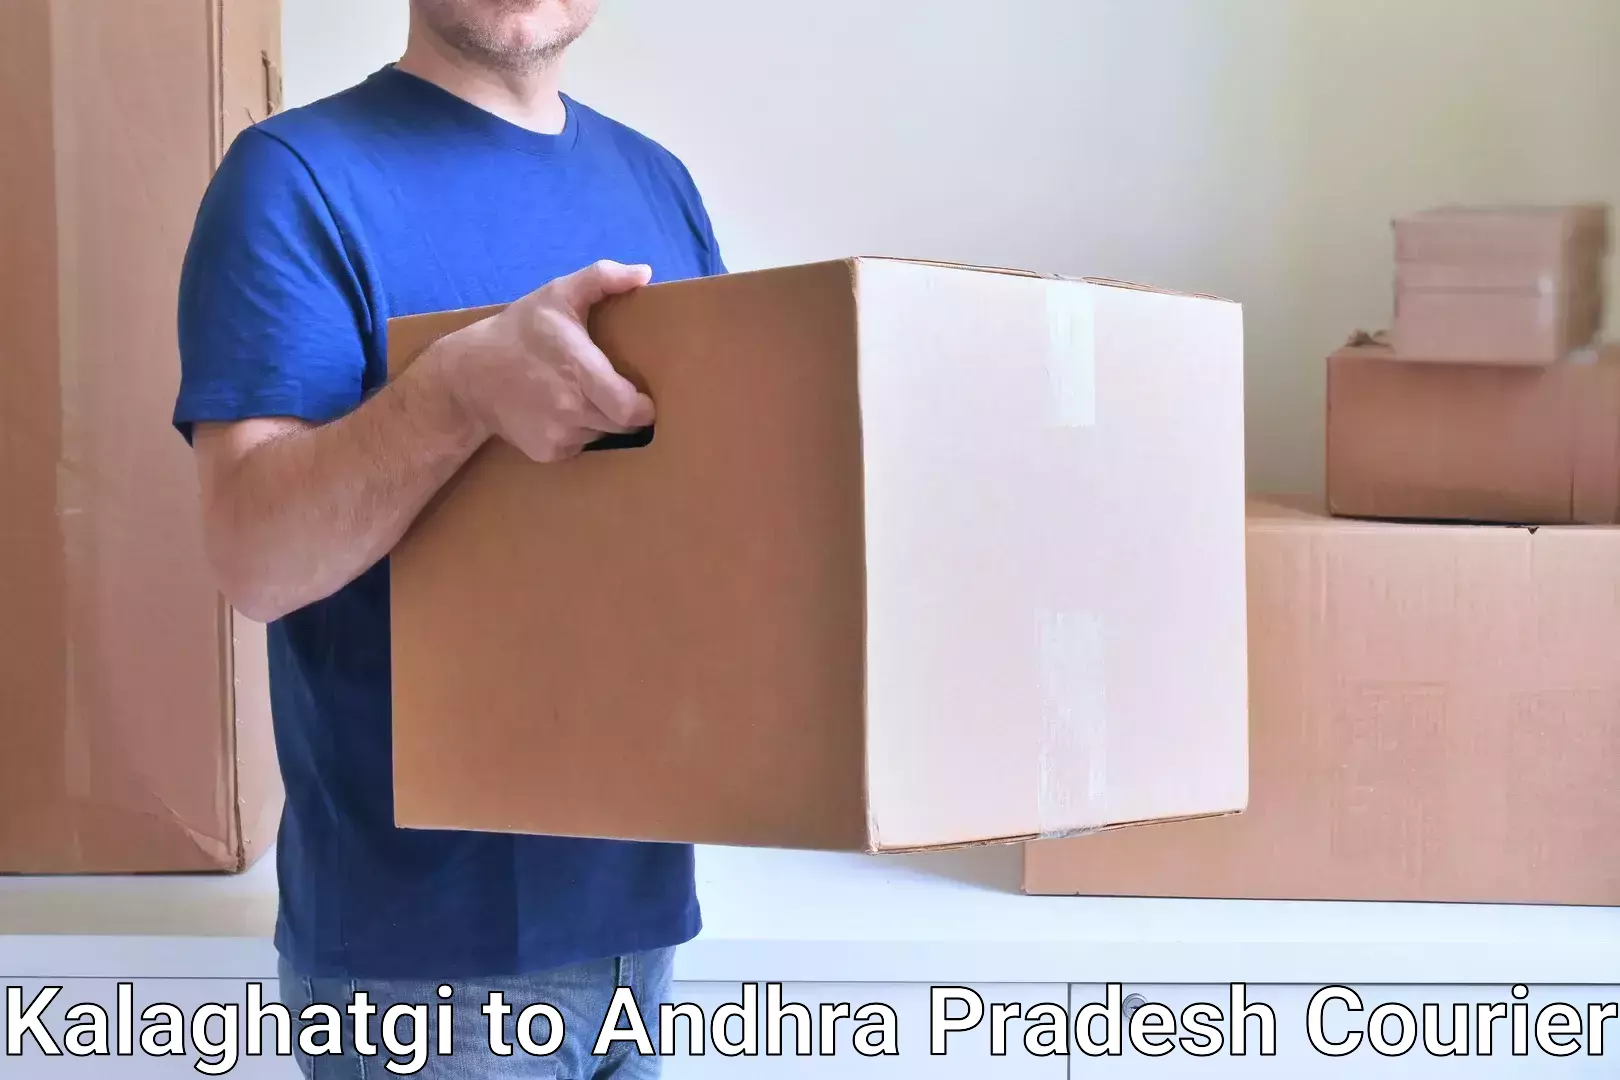 State-of-the-art courier technology Kalaghatgi to Andhra Pradesh